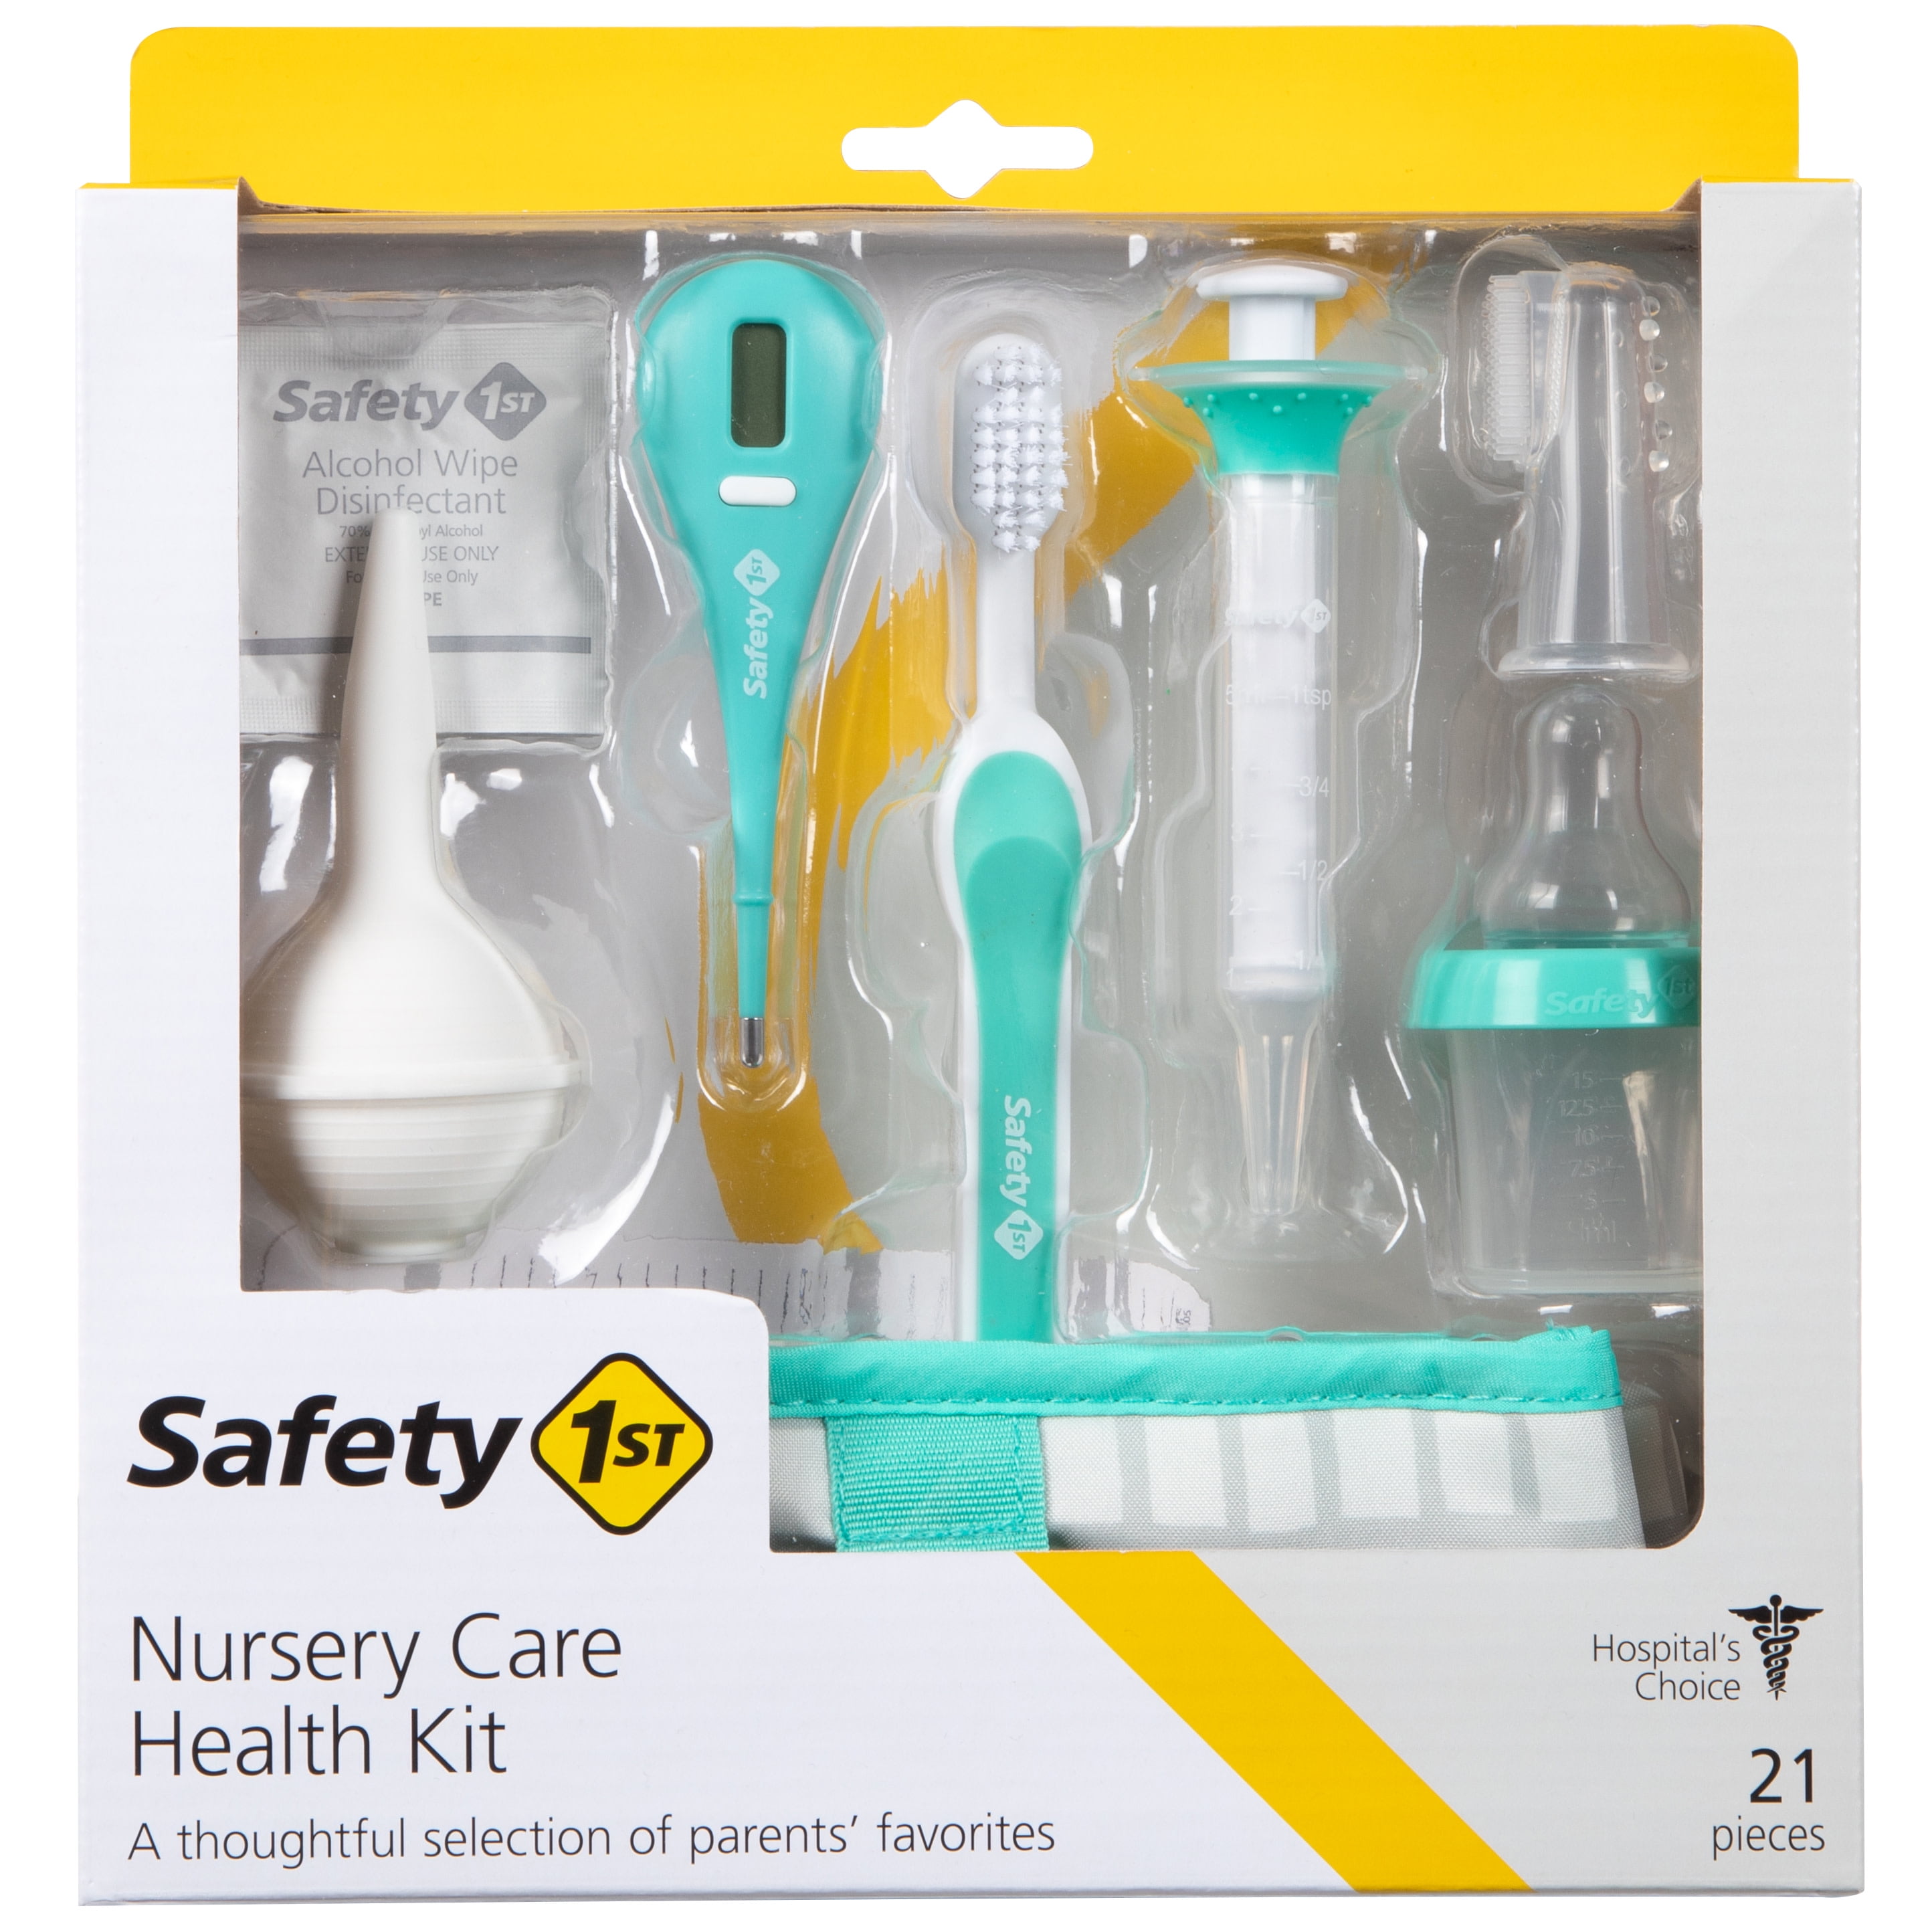 11 PIECES SAFETY 1st HEALTHCARE KIT 